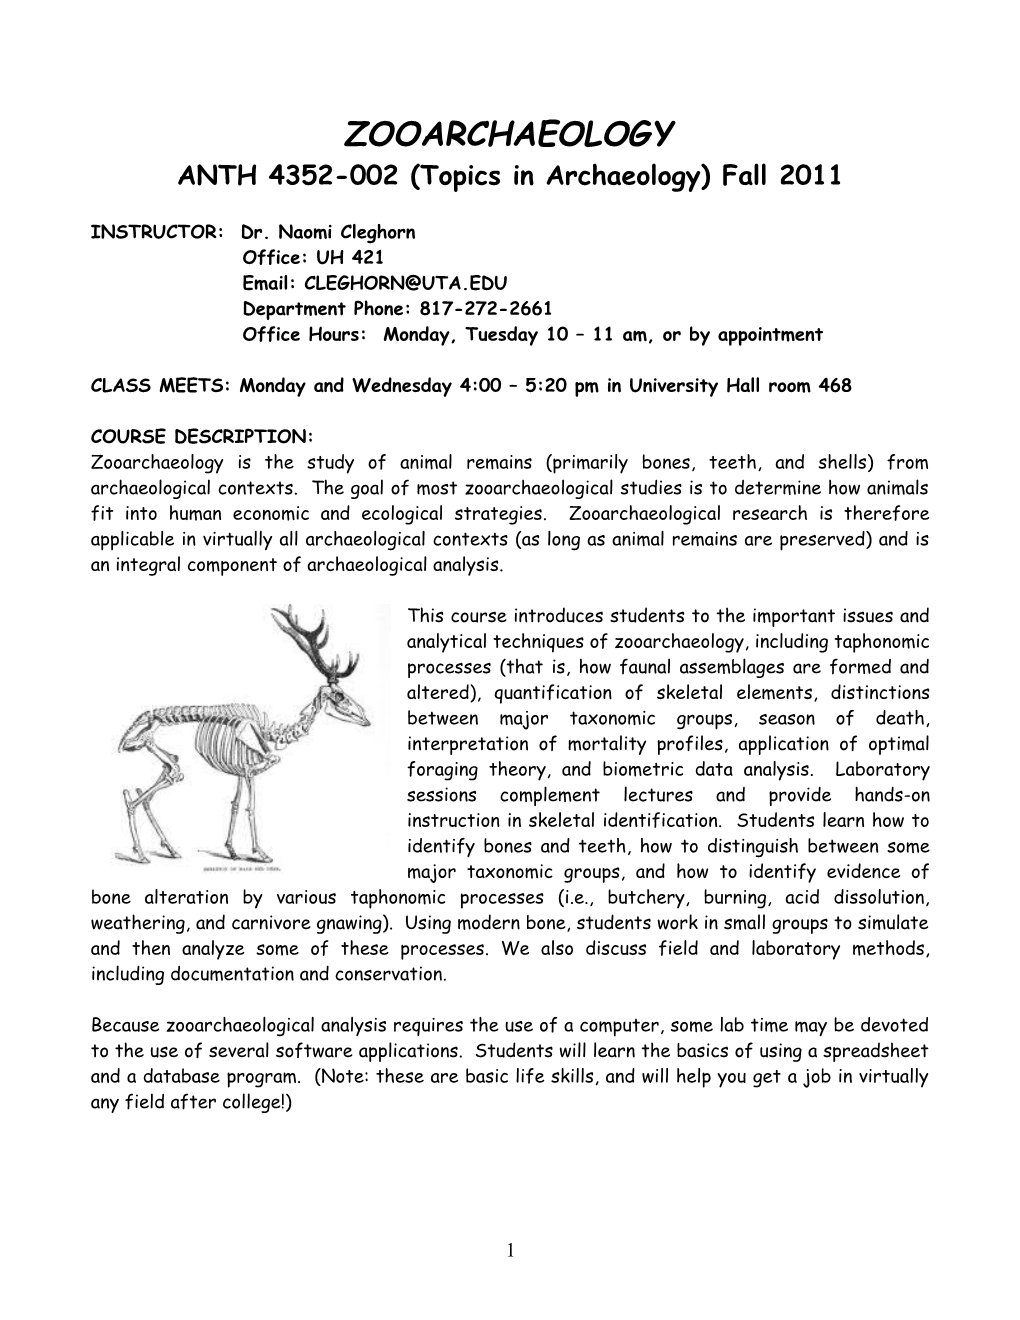 ANTH 4352-002 (Topics in Archaeology) Fall 2011